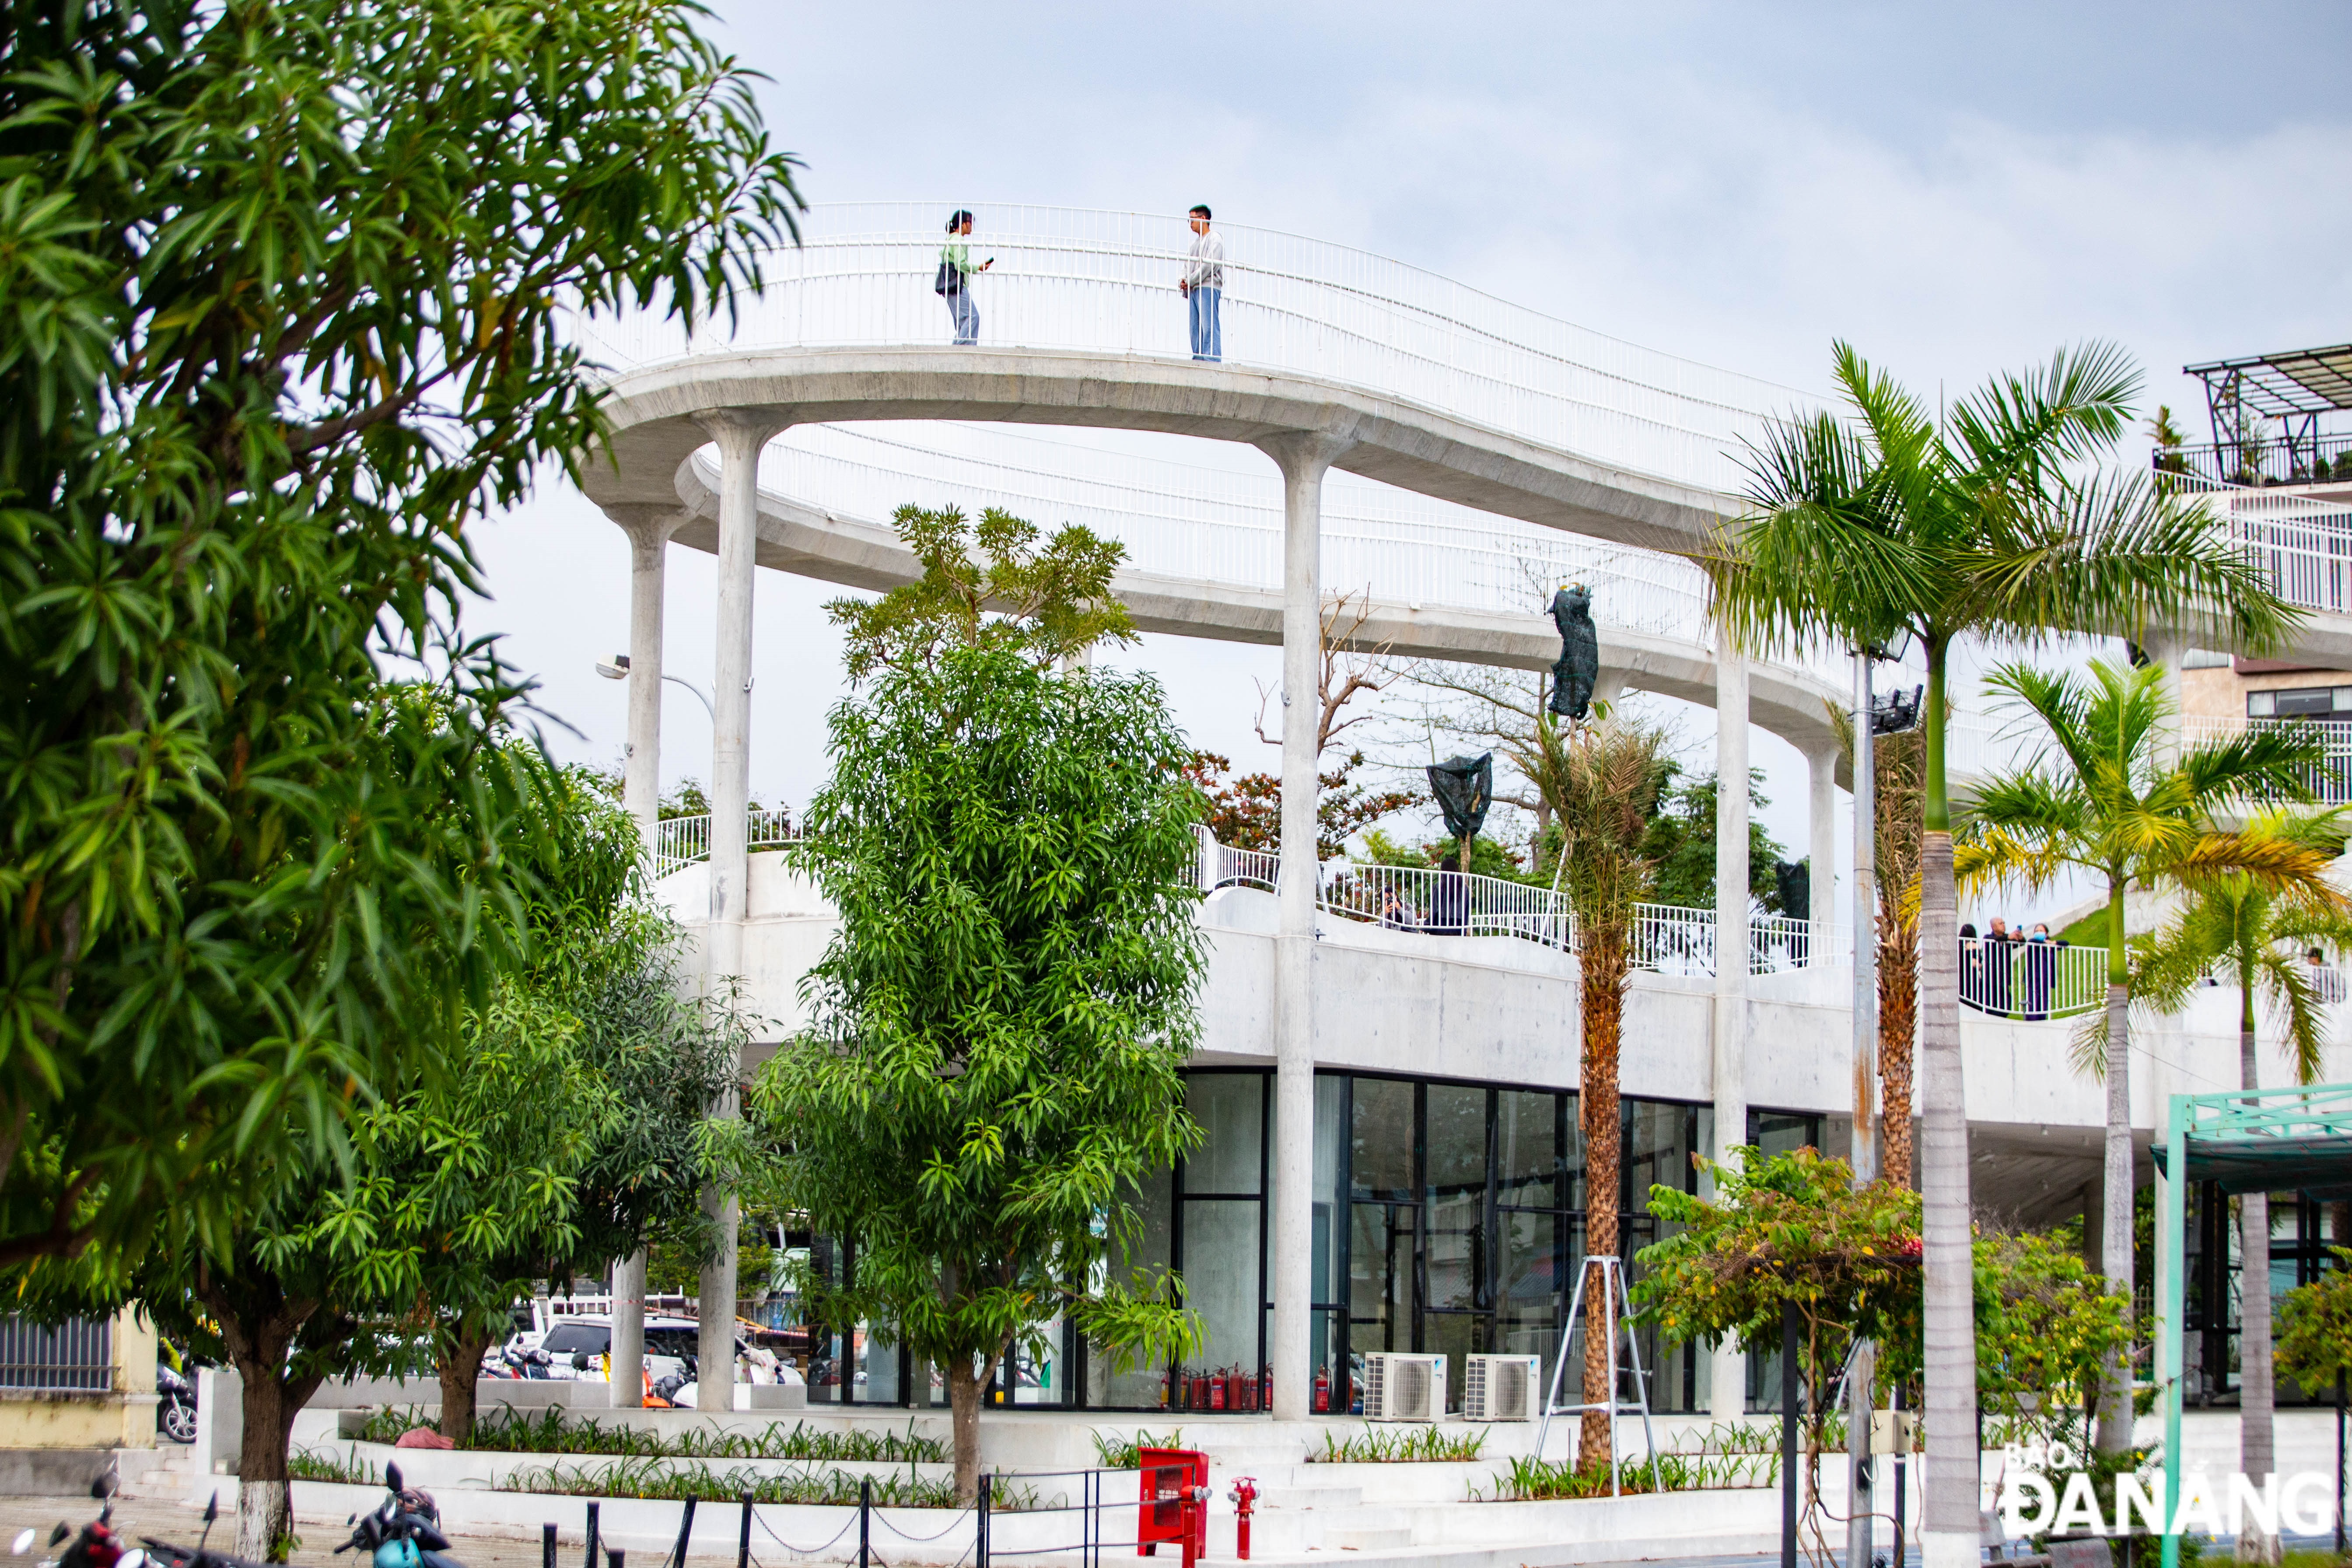 Constructed by the Saiko Construction and Trading Company Limited, the work boasts a high, spacious and airy space, convenient for exhibition activities. Director of the company Pham Thanh Tung said that his company closely followed the architectural design to bring quality and aesthetics work that is truly worthy for the development of Son Tra District, Da Nang.